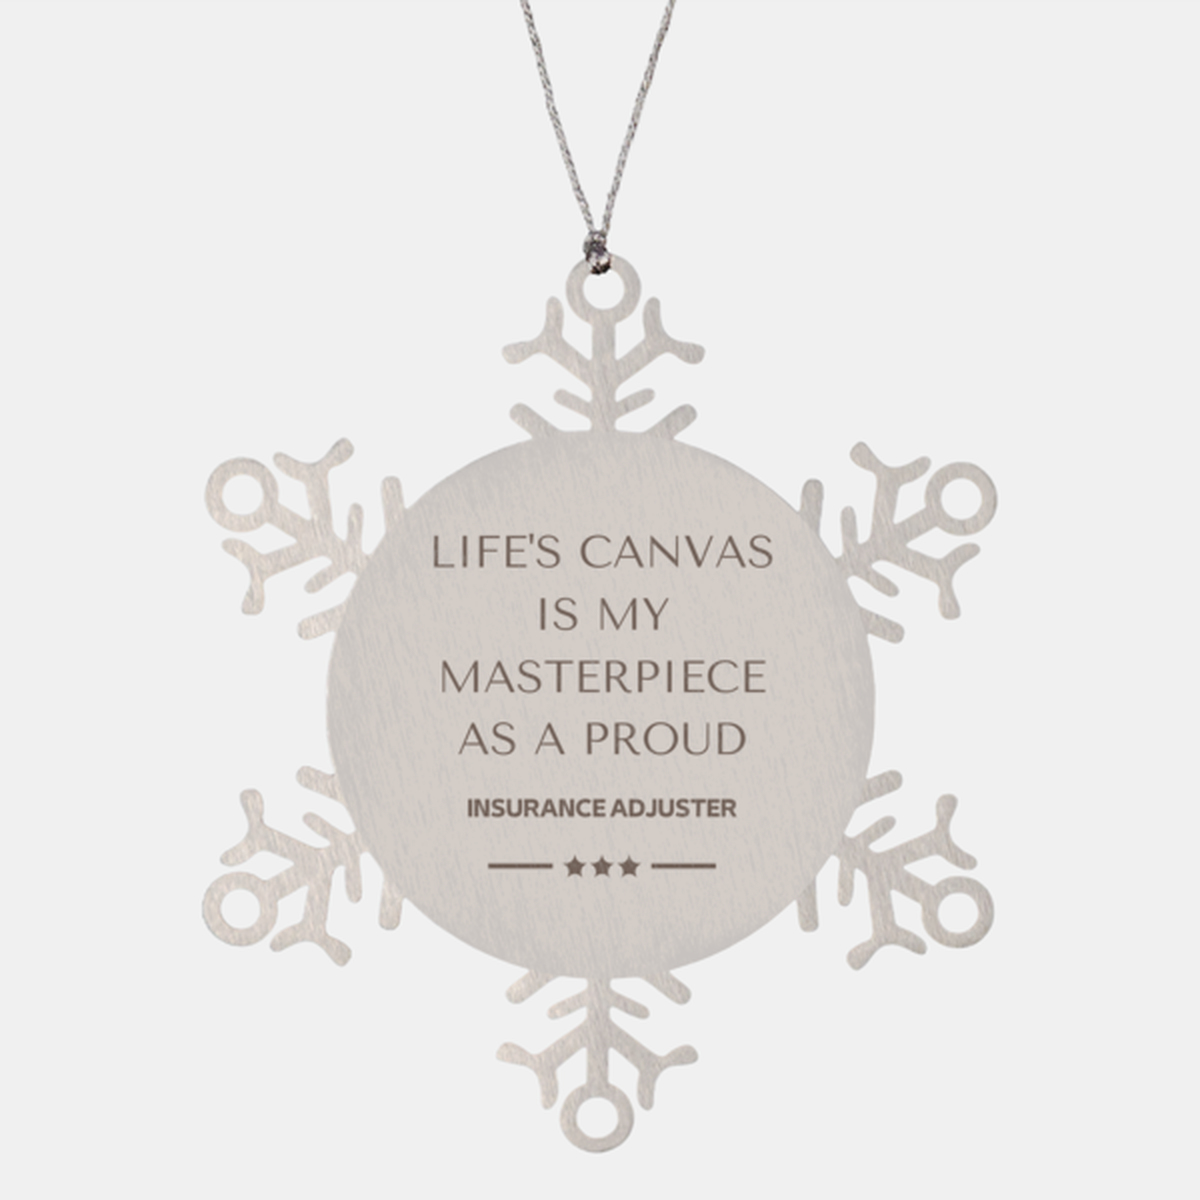 Proud Insurance Adjuster Gifts, Life's canvas is my masterpiece, Epic Birthday Christmas Unique Snowflake Ornament For Insurance Adjuster, Coworkers, Men, Women, Friends